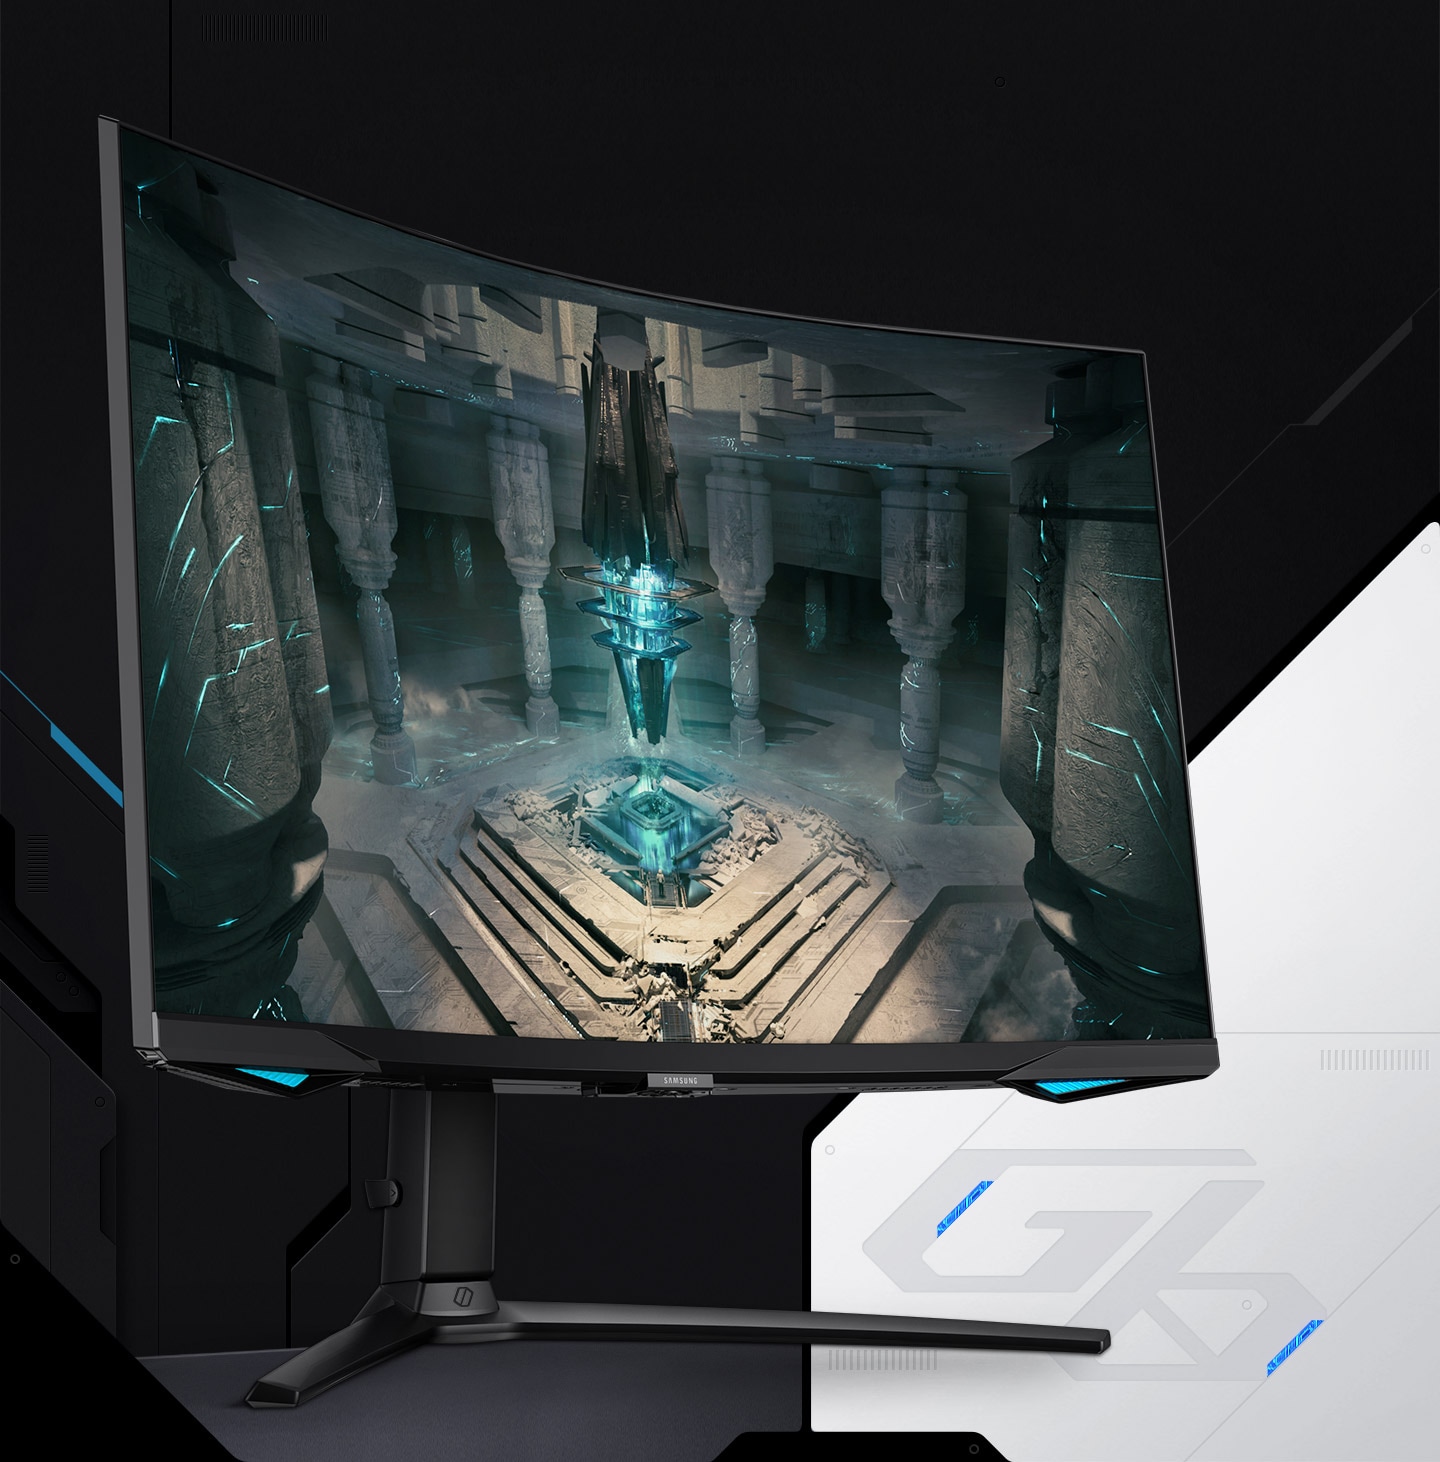 On the monitor display is a skyblue rocket ship with light emitting from its engine exhausts inside an underground cave. The rocket ship is set to launch out of the opening above, and surrounded by stone pillars and steps. ""G6"" logo is placed on the right side of the monitor stand.